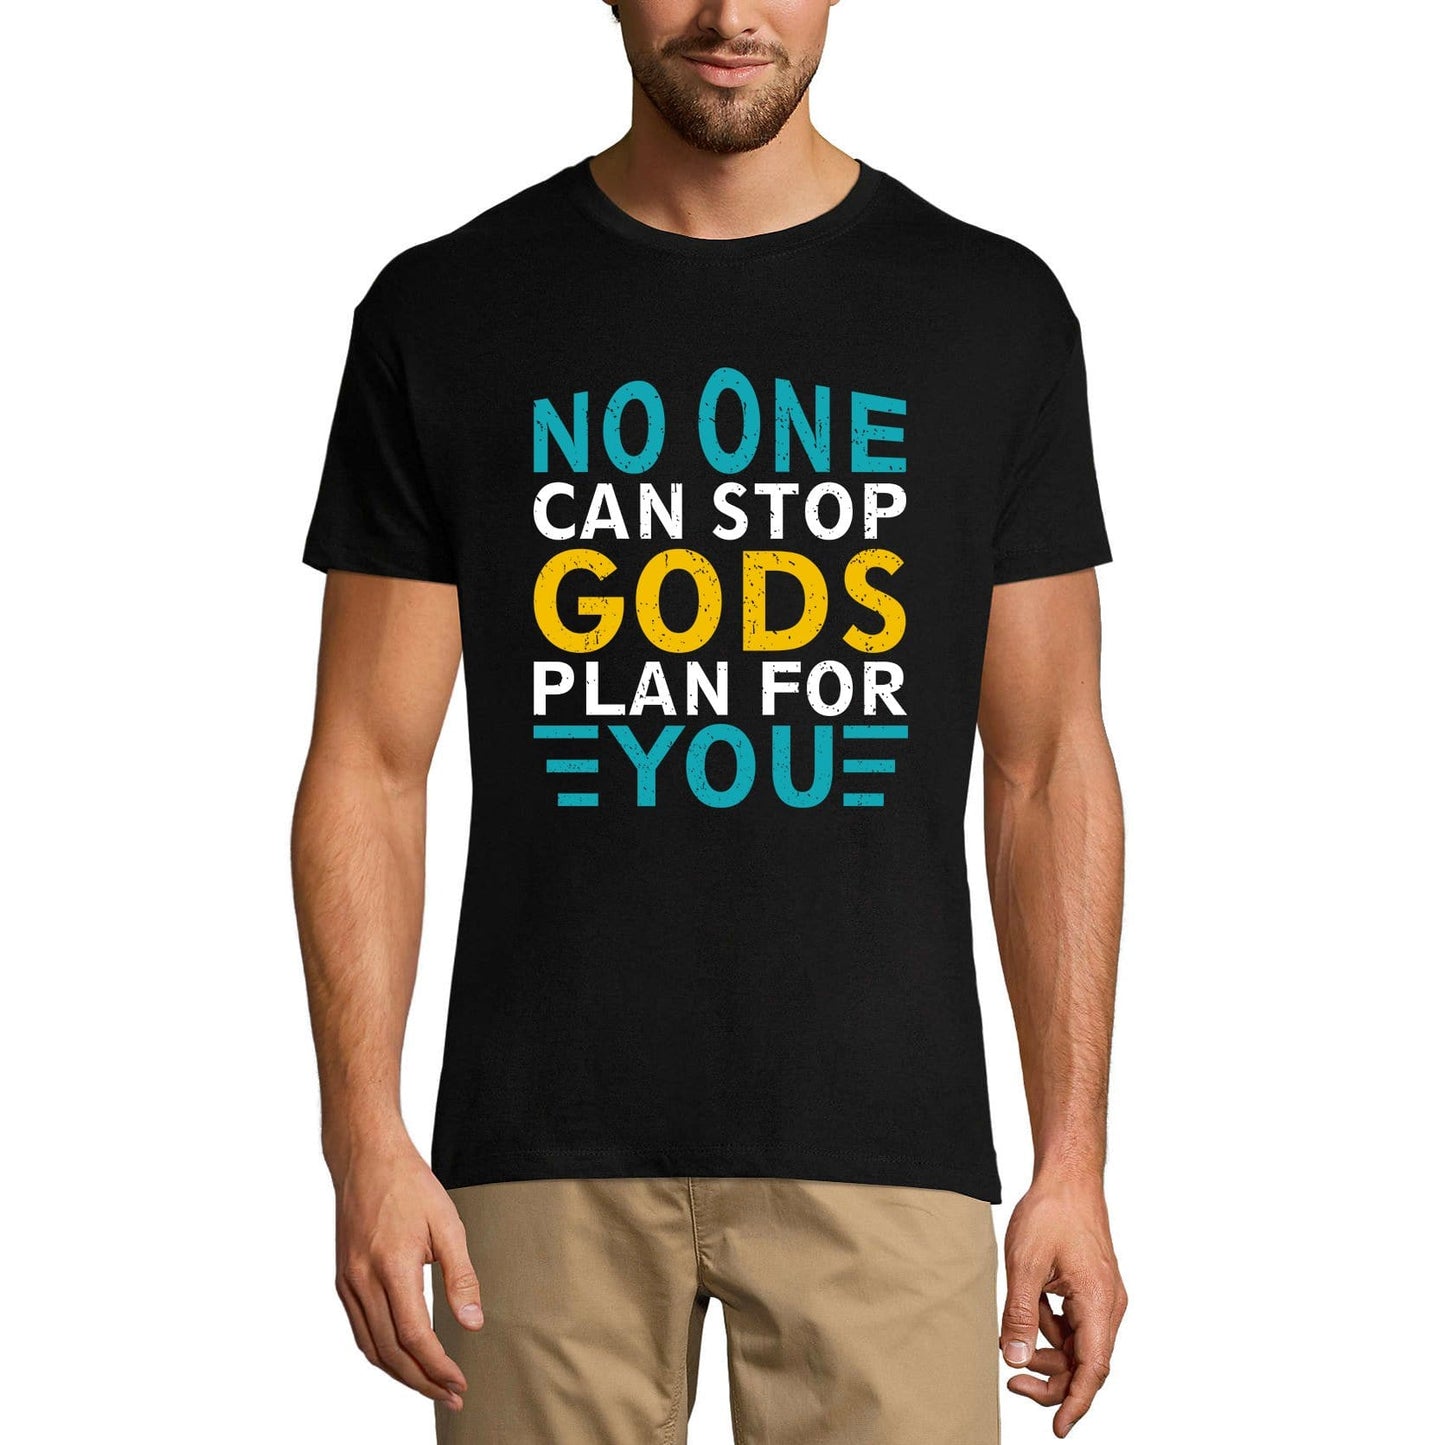 ULTRABASIC Men's T-Shirt No One Can Stop Gods Plan For You - Religious Shirt